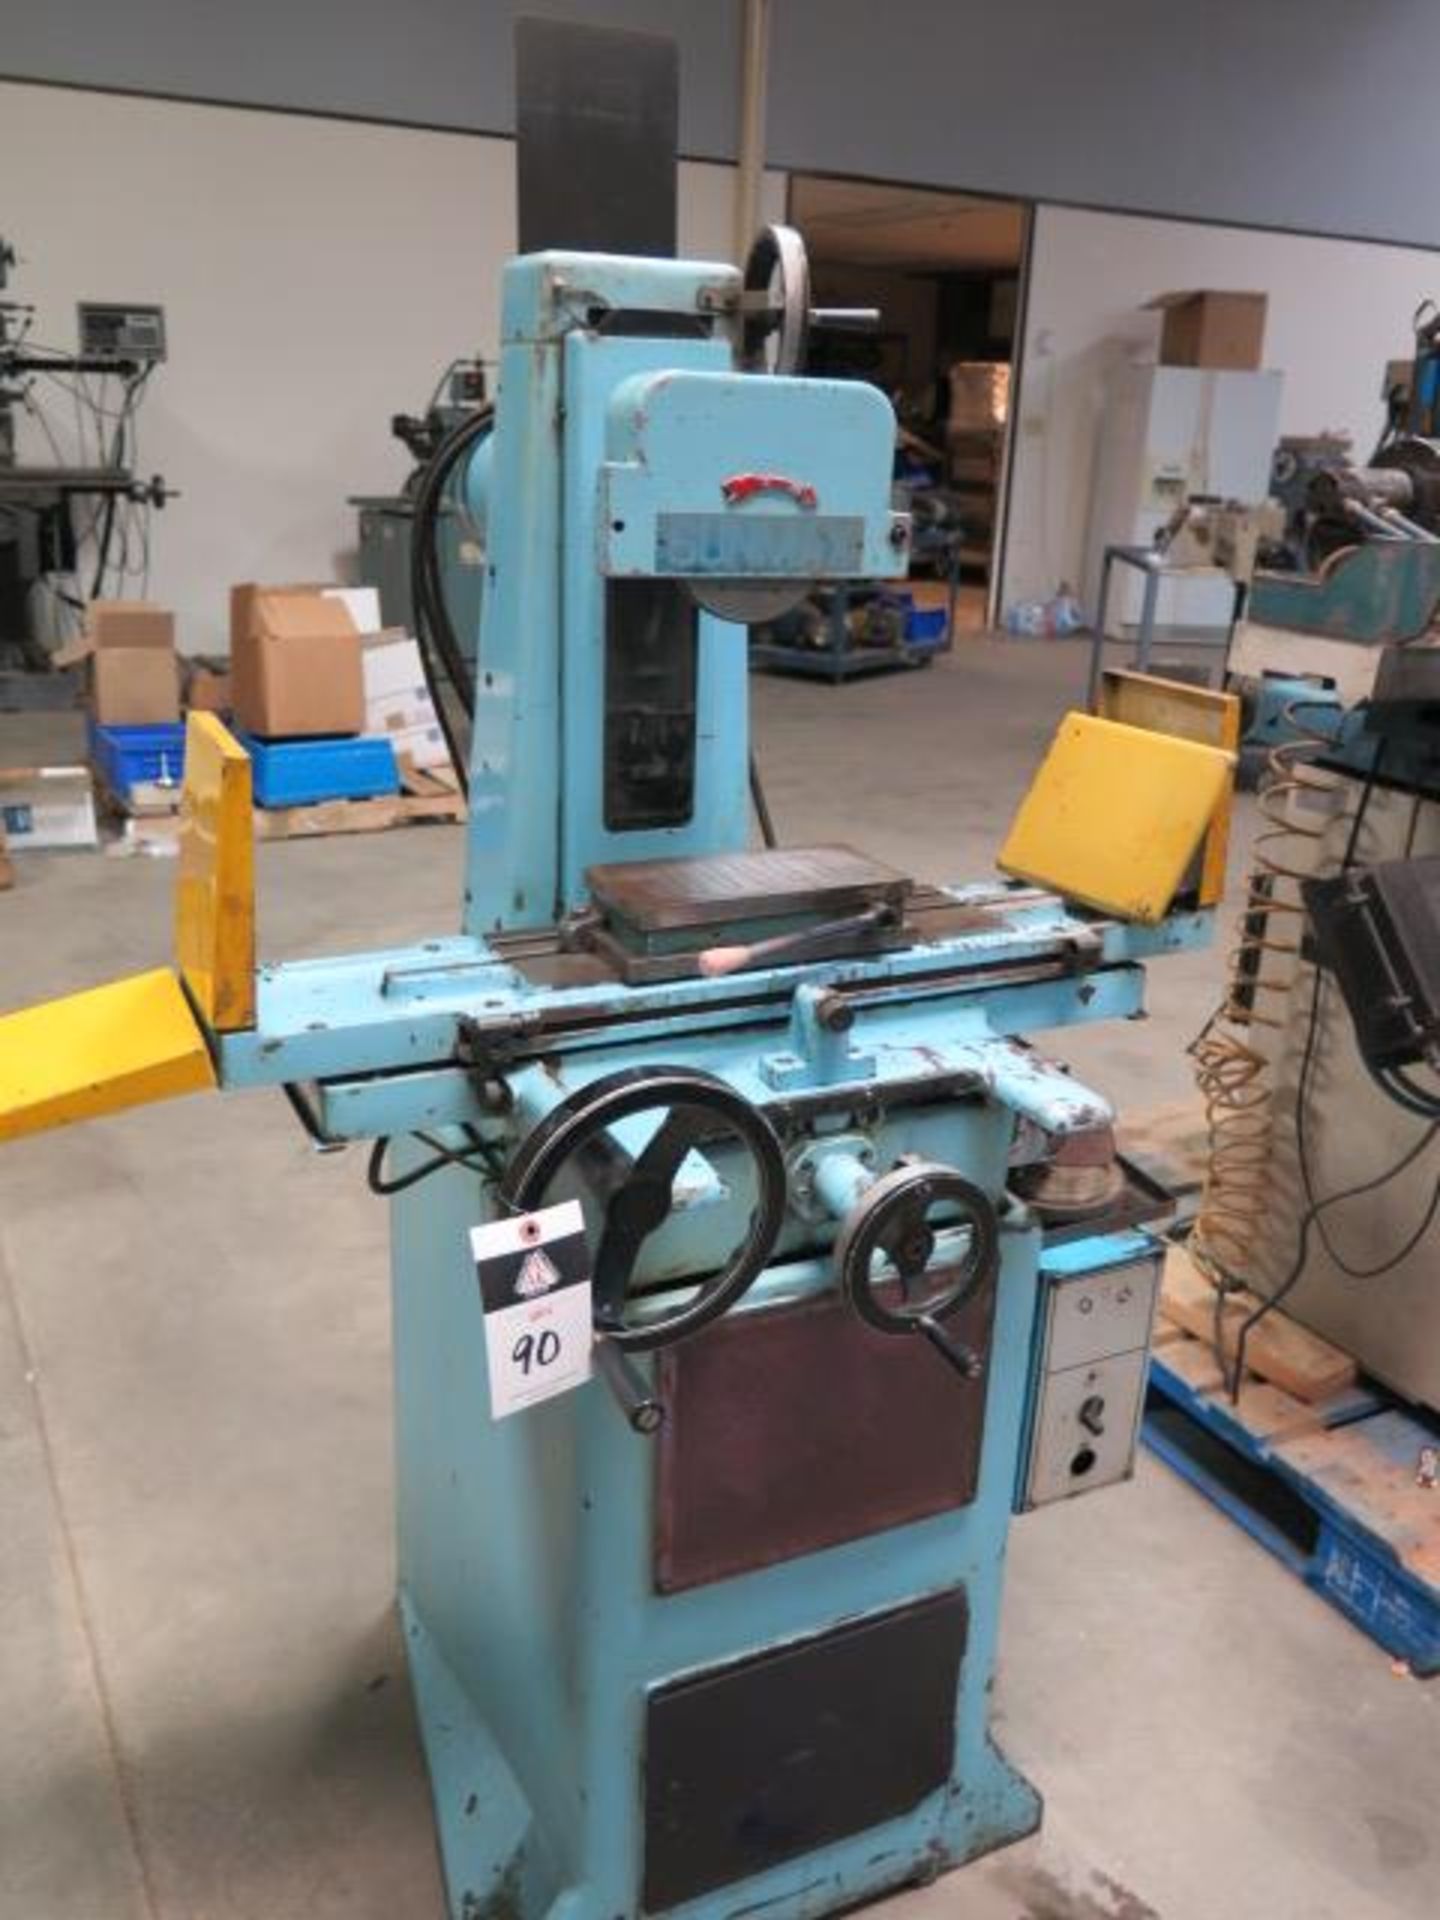 Sunmax 6" x 18" Surface Grinder w/ 5" x 10" Magnetic Chuck (SOLD AS-IS - NO WARRANTY) - Image 2 of 7